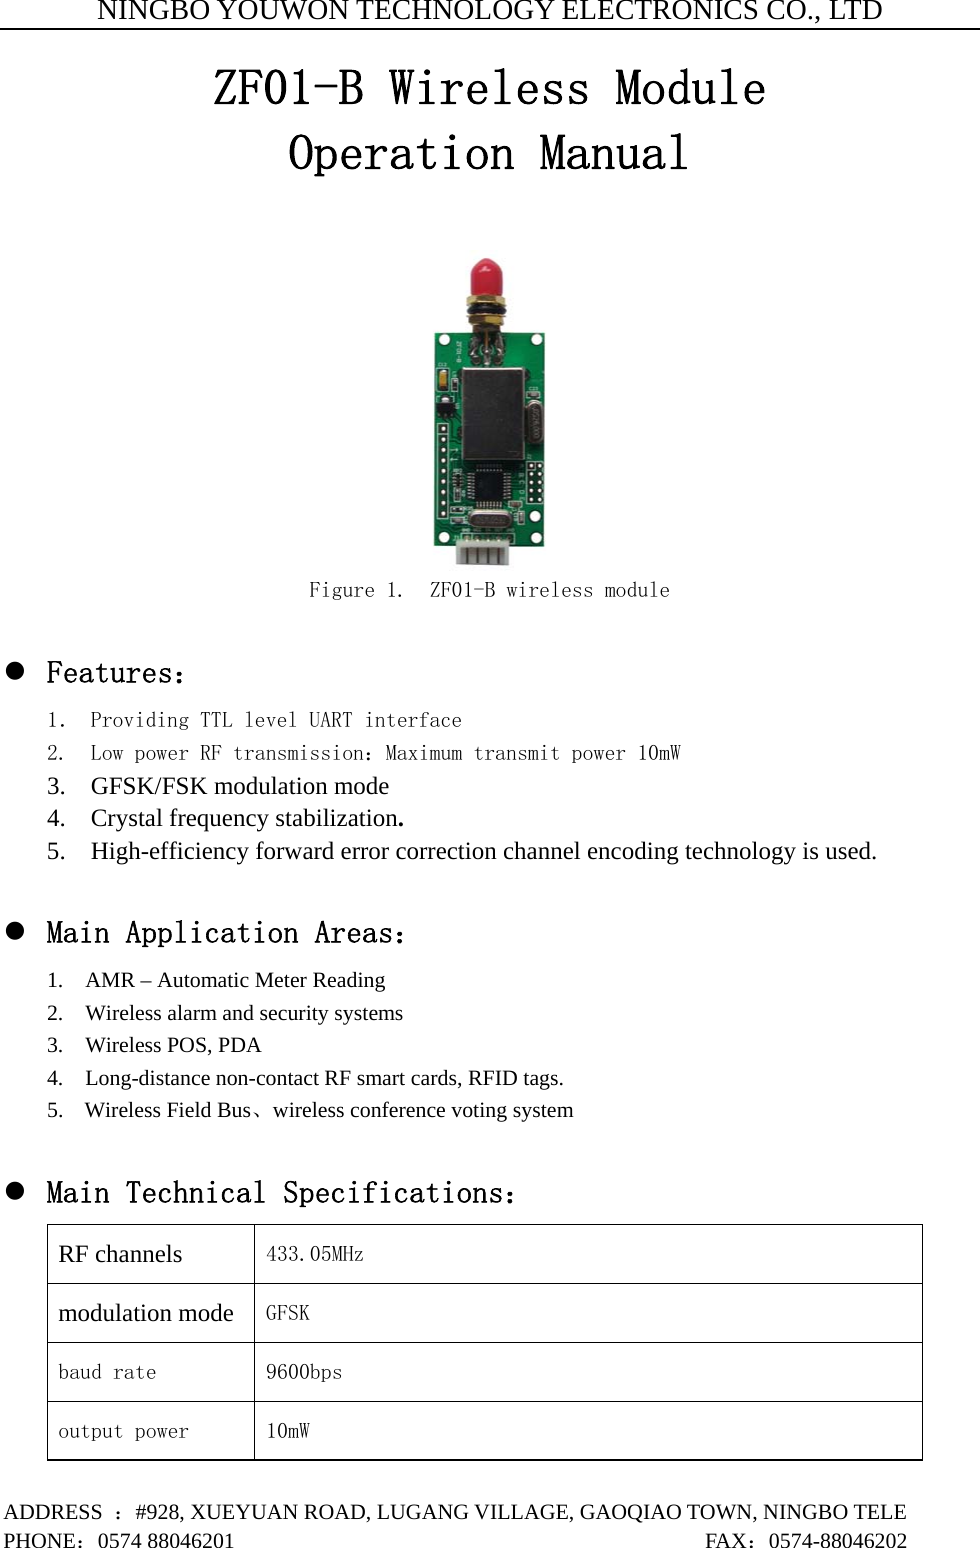 NINGBO YOUWON TECHNOLOGY ELECTRONICS CO., LTD ADDRESS  ：#928, XUEYUAN ROAD, LUGANG VILLAGE, GAOQIAO TOWN, NINGBO TELE PHONE：0574 88046201                                           FAX：0574-88046202 ZF01-B Wireless Module Operation Manual   Figure 1.  ZF01-B wireless module  z Features： 1． Providing TTL level UART interface 2.  Low power RF transmission：Maximum transmit power 10mW 3.  GFSK/FSK modulation mode 4.  Crystal frequency stabilization. 5.    High-efficiency forward error correction channel encoding technology is used.  z Main Application Areas： 1.    AMR – Automatic Meter Reading 2.    Wireless alarm and security systems 3.  Wireless POS, PDA  4.    Long-distance non-contact RF smart cards, RFID tags. 5. Wireless Field Bus、wireless conference voting system    z Main Technical Specifications： RF channels 433.05MHz  modulation mode GFSK  baud rate 9600bps output power 10mW 